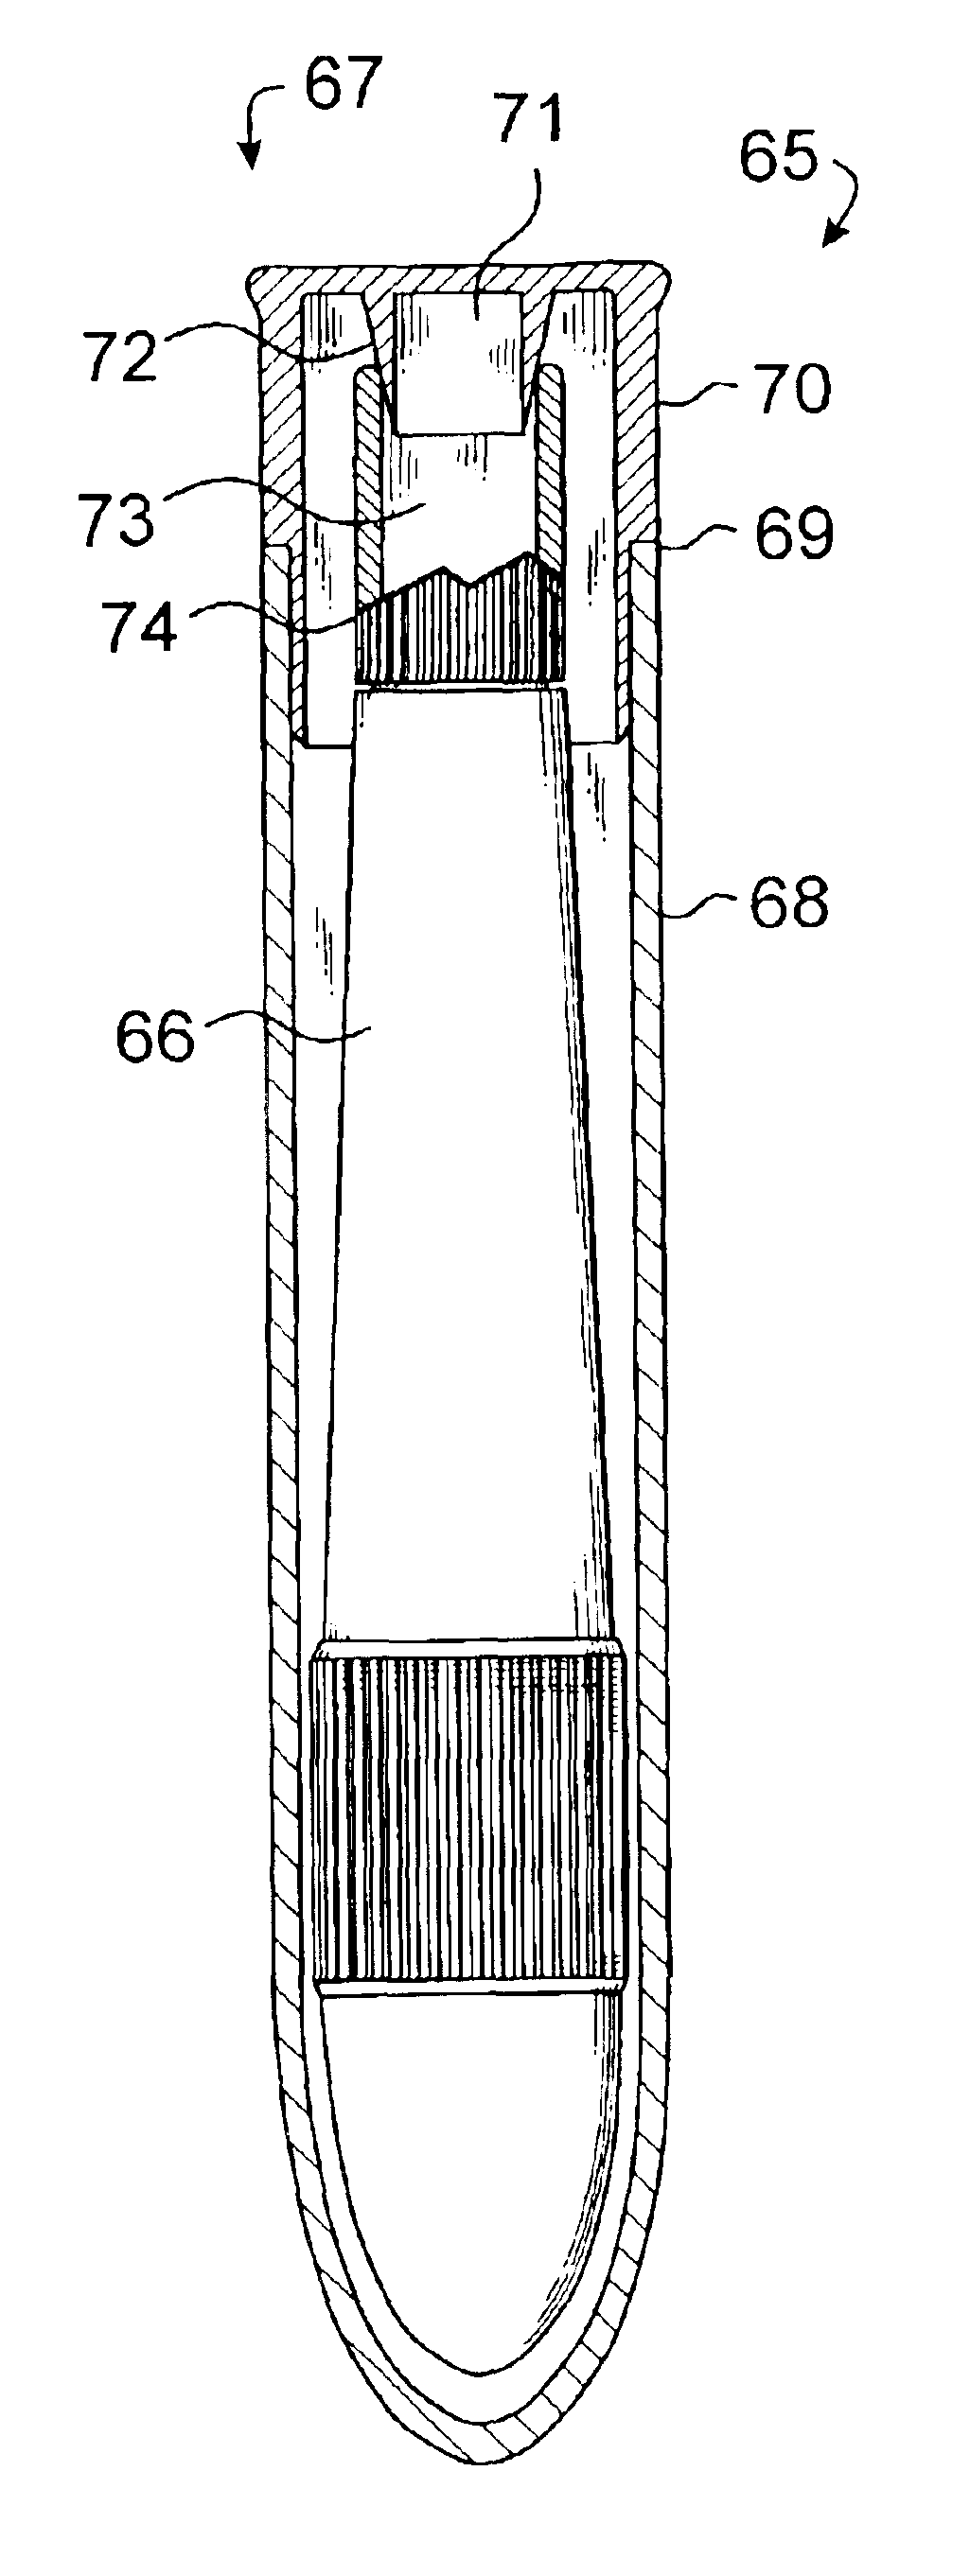 Specimen collection and storage and transport device and method